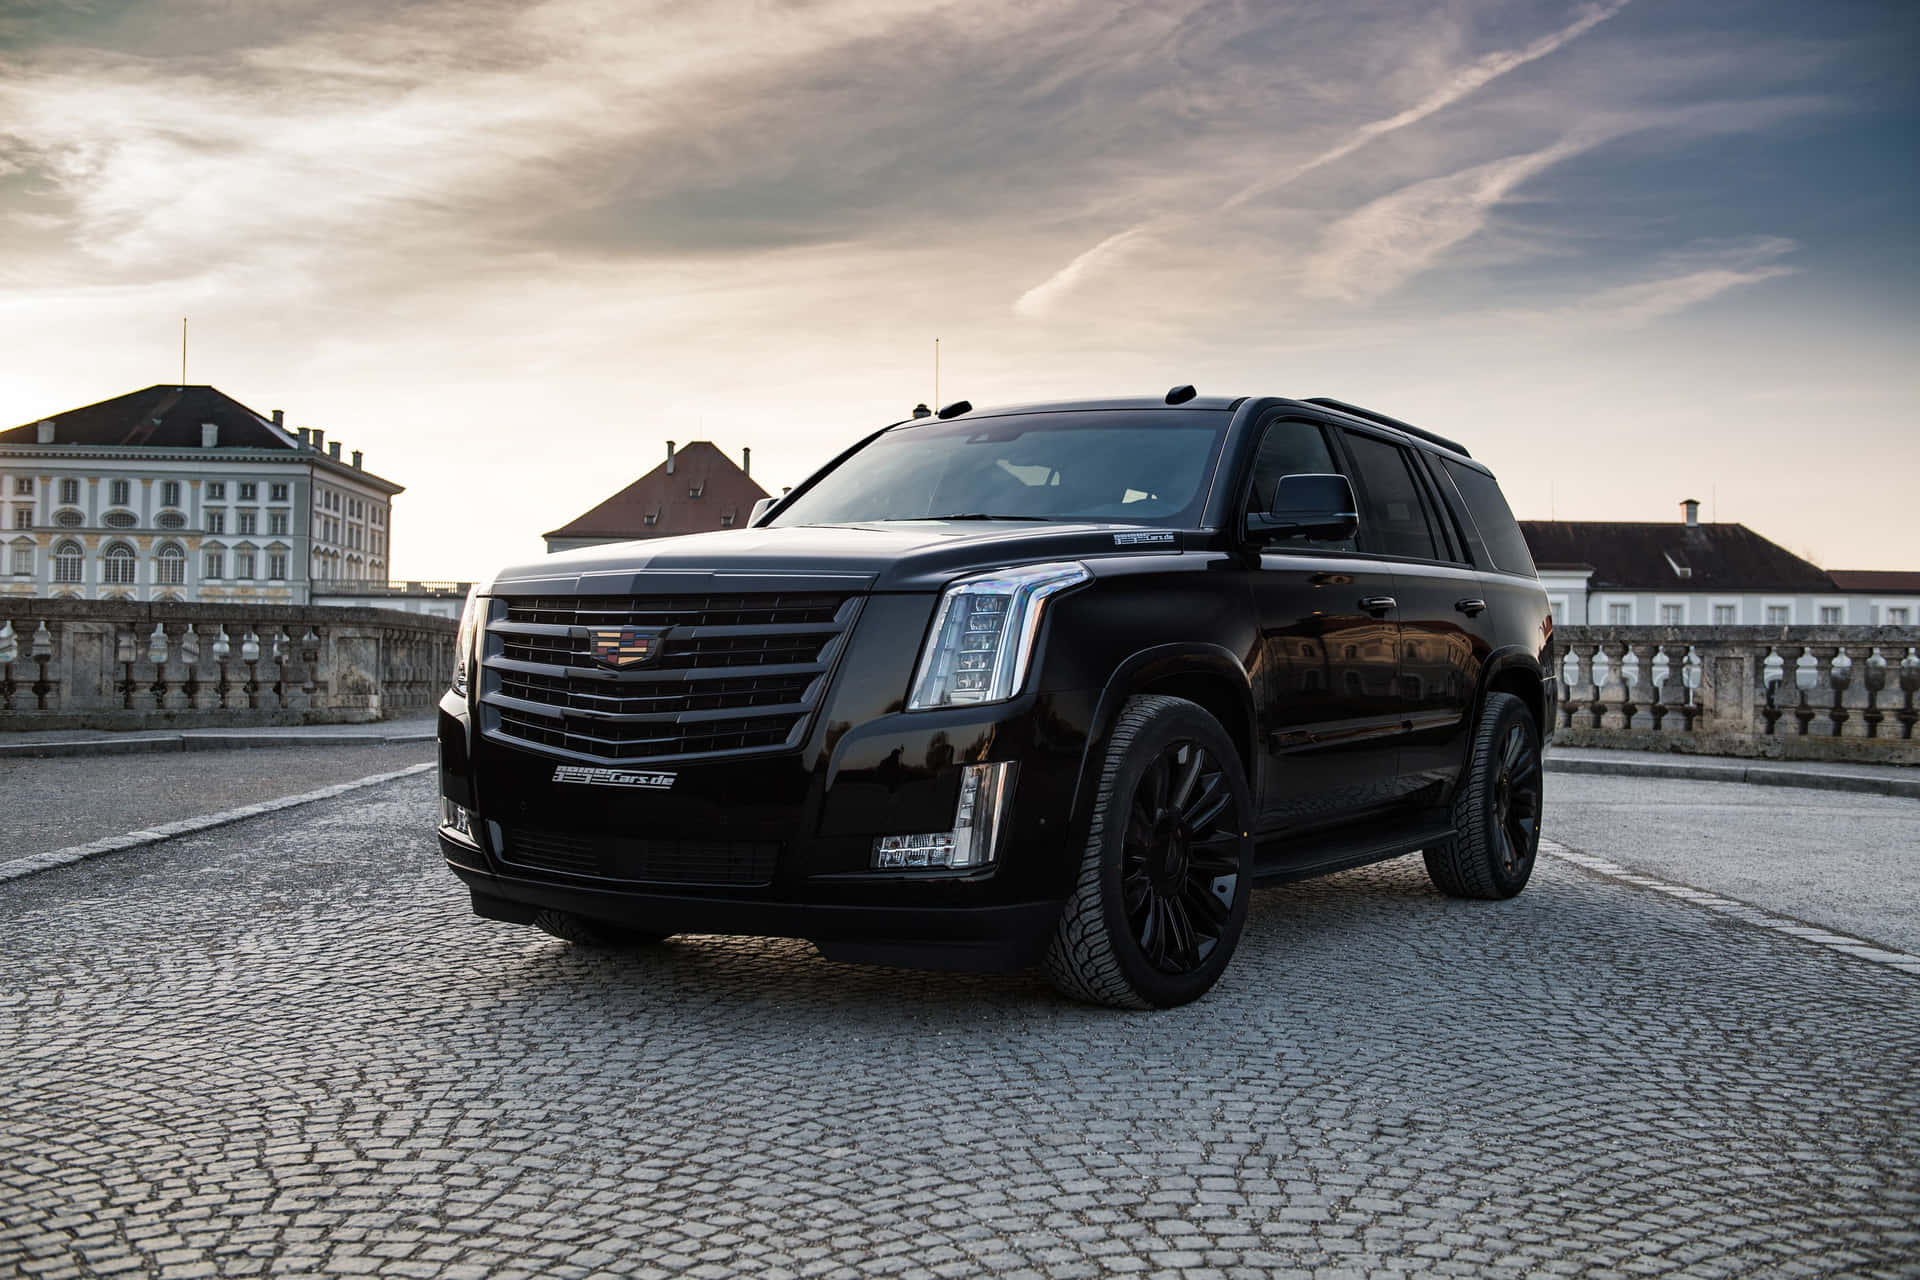 Luxurious Cadillac Escalade on the road Wallpaper